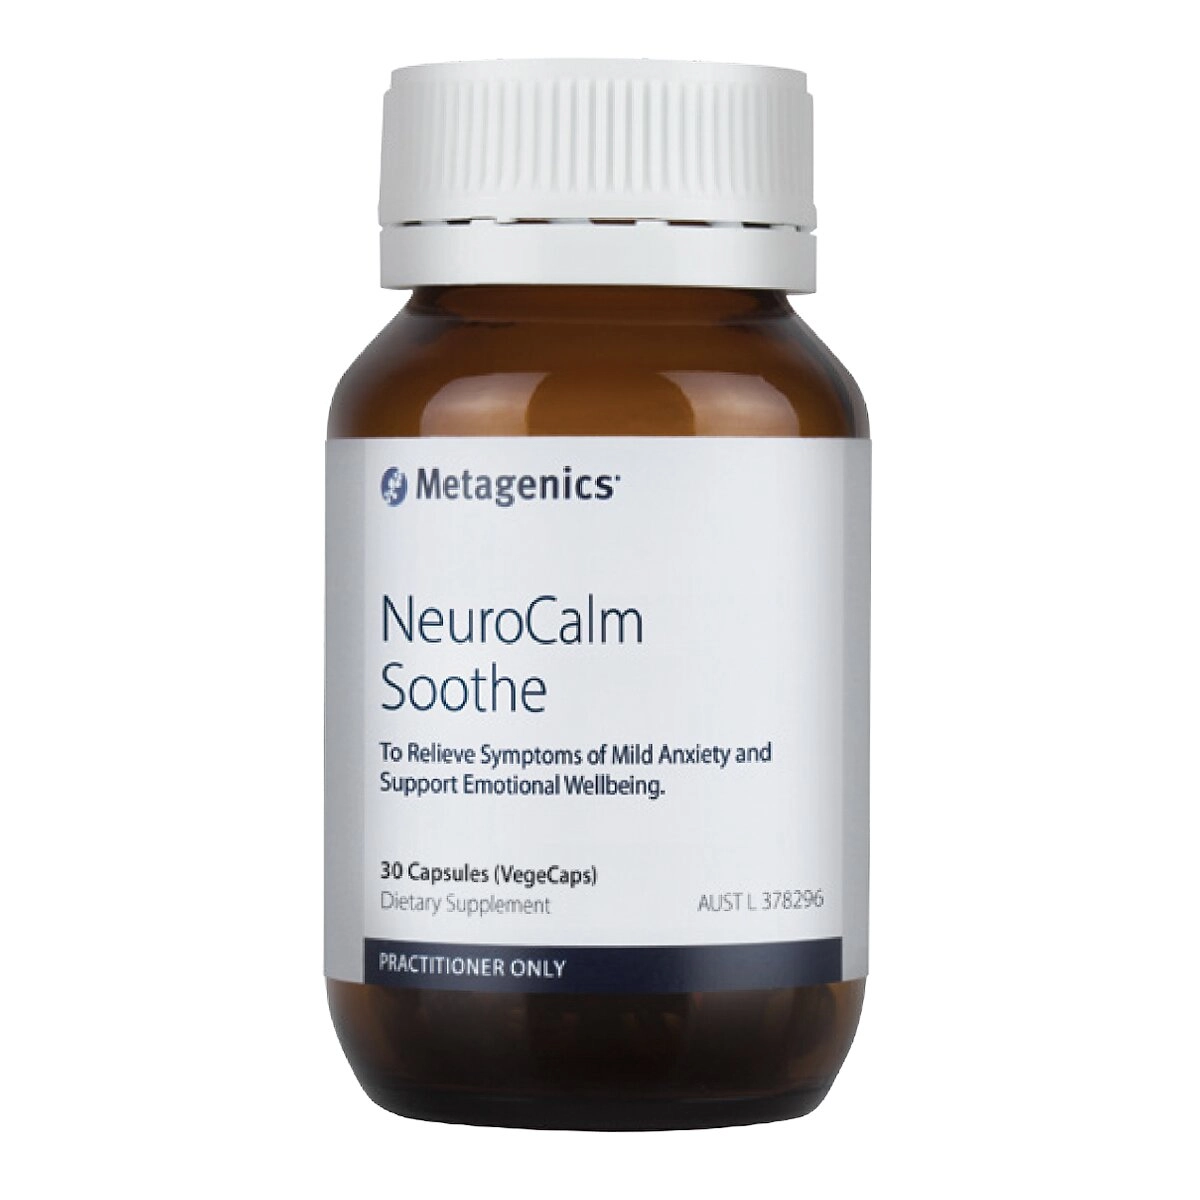 image of Metagenics NeuroCalm Soothe 30c on white background